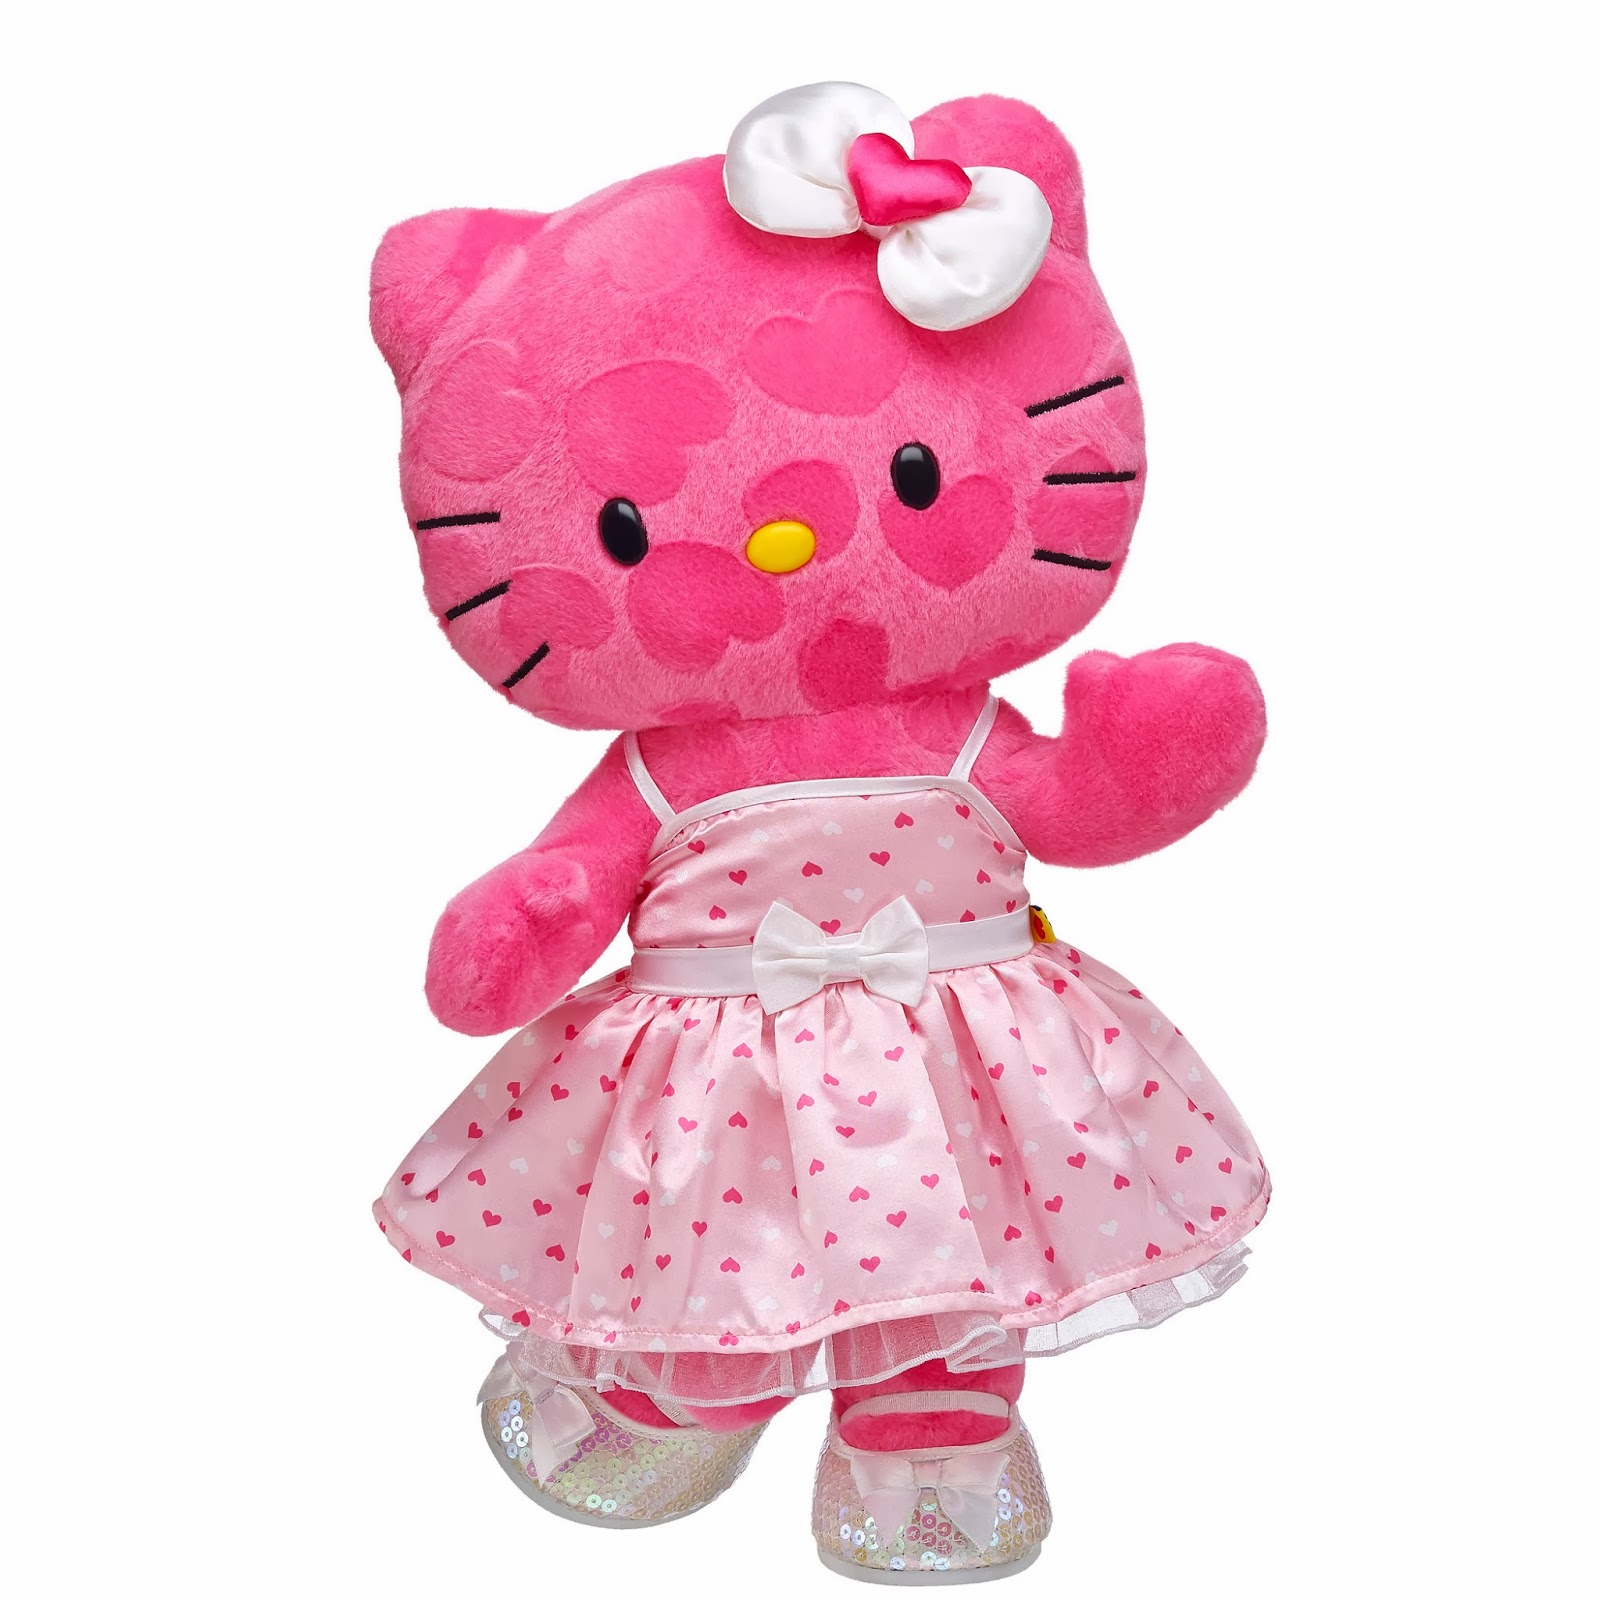 Finally popular brand Hello Kitty Build a bear Shirt topranked.in